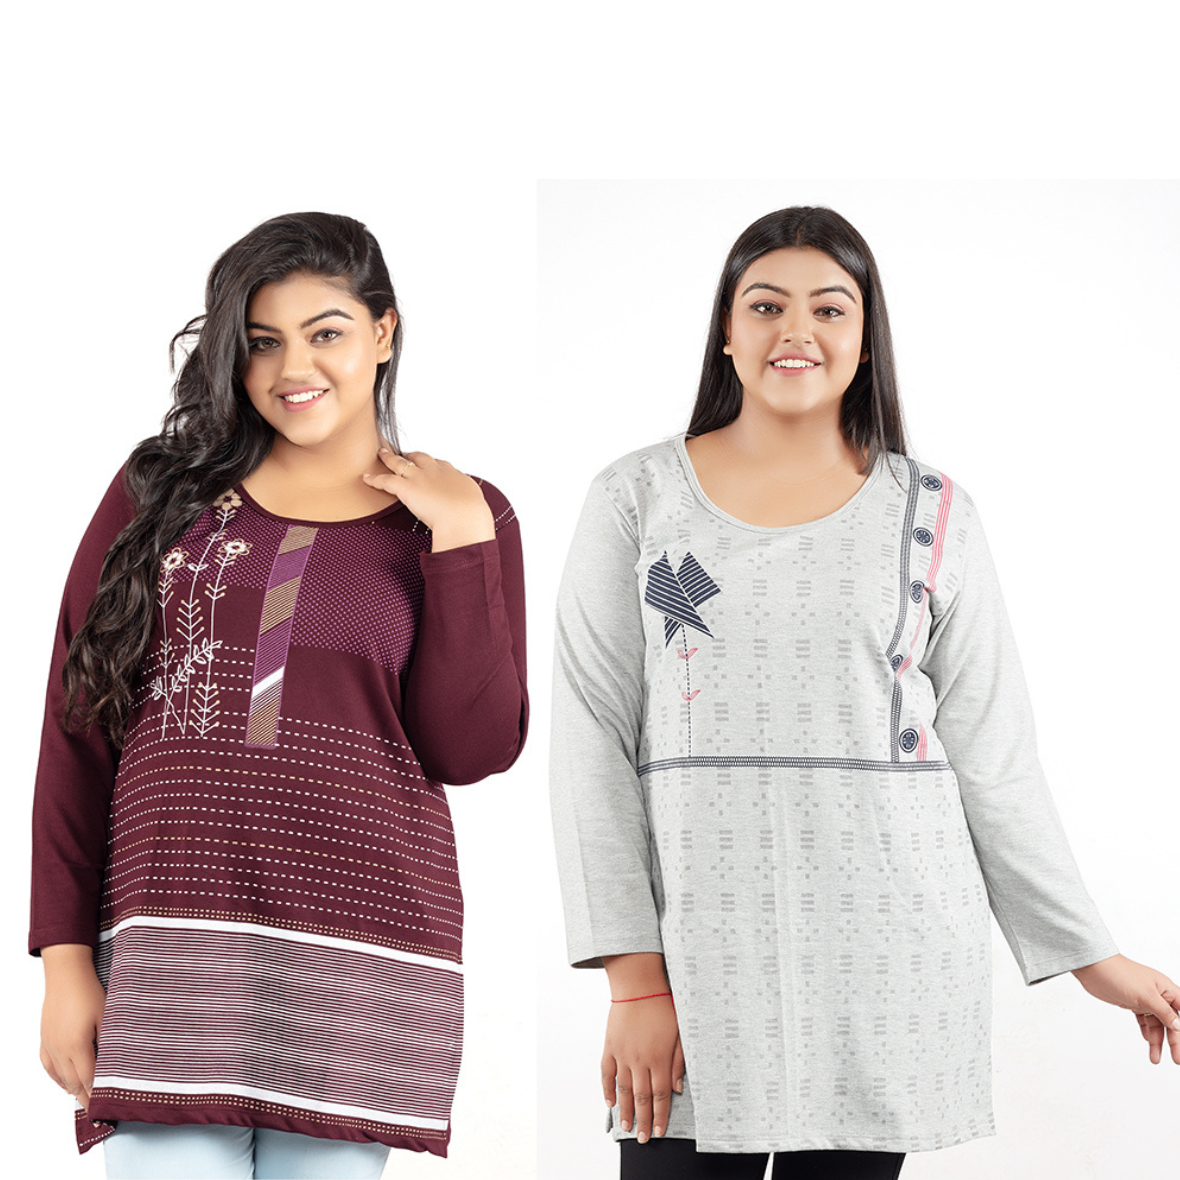 Plus Size Printed Long Tops For Women Full Sleeves - Pack of 2 (Wine & Grey) At Onlion 